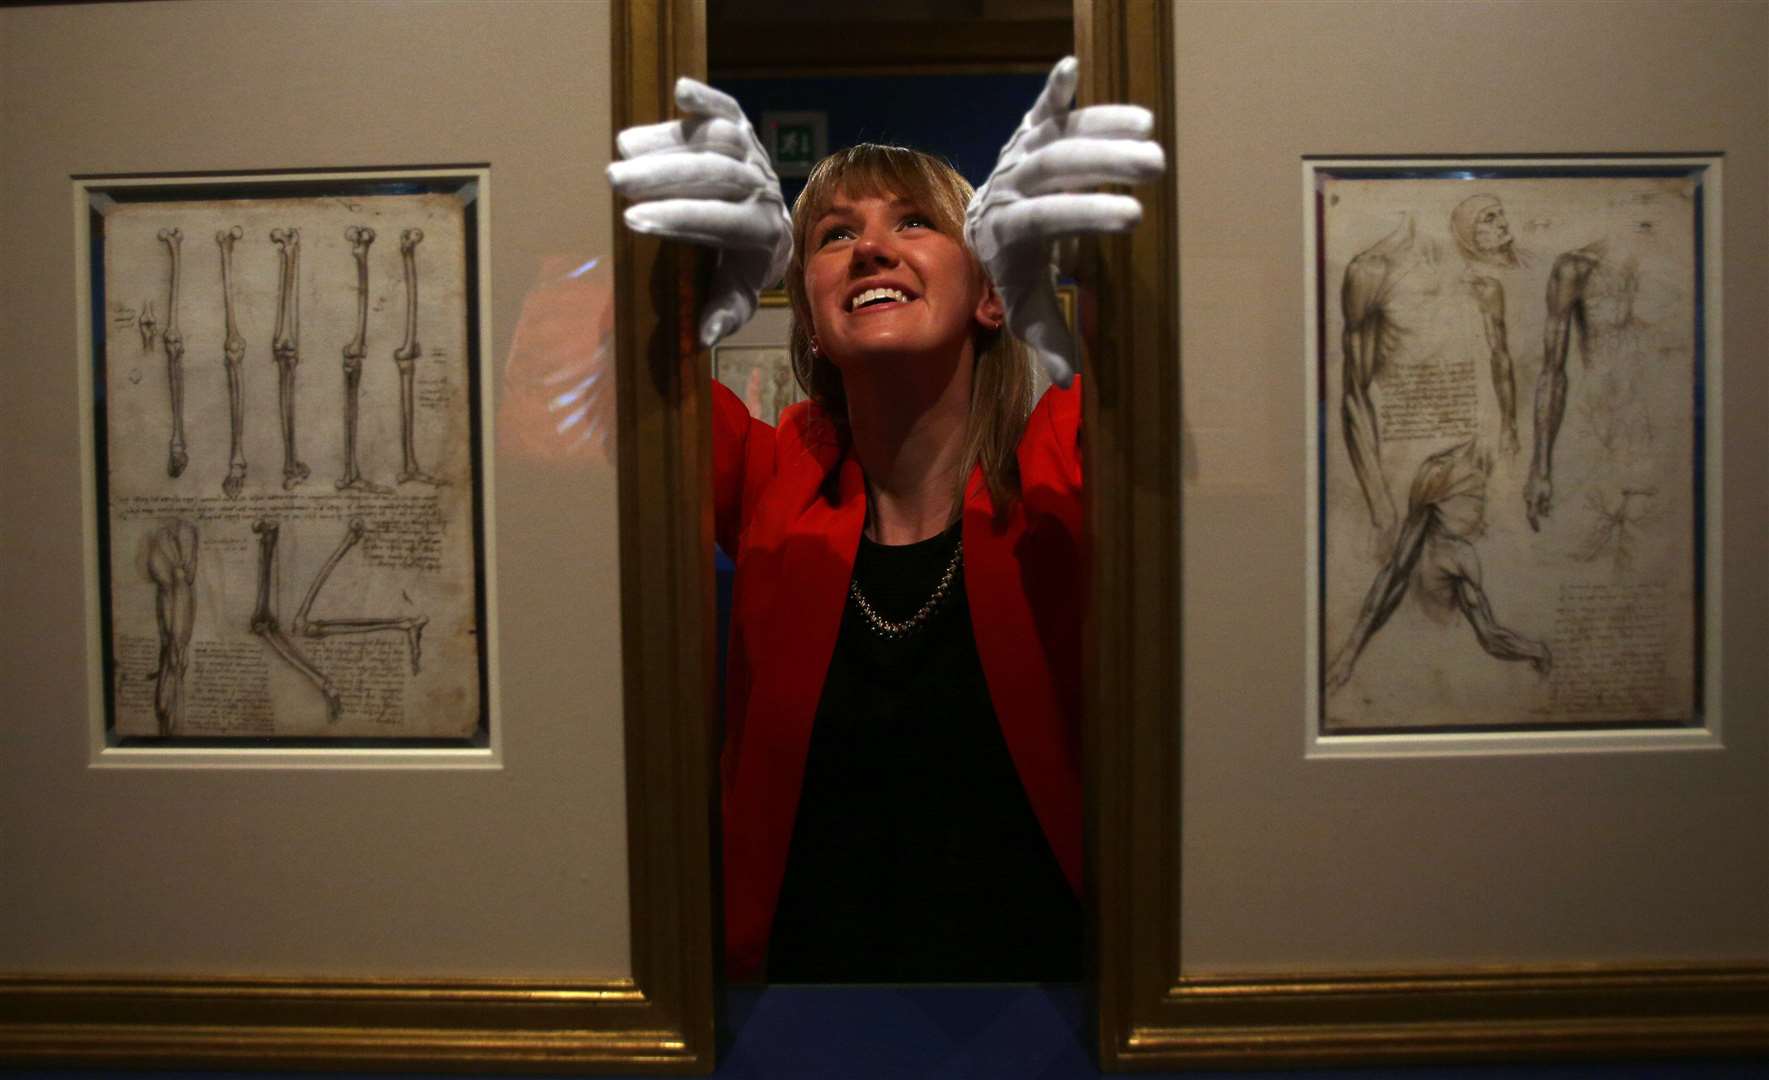 The Leonardo da Vinci exhibition at the Queens Gallery Palace of Holyroodhouse in Edinburgh (Archive/PA)